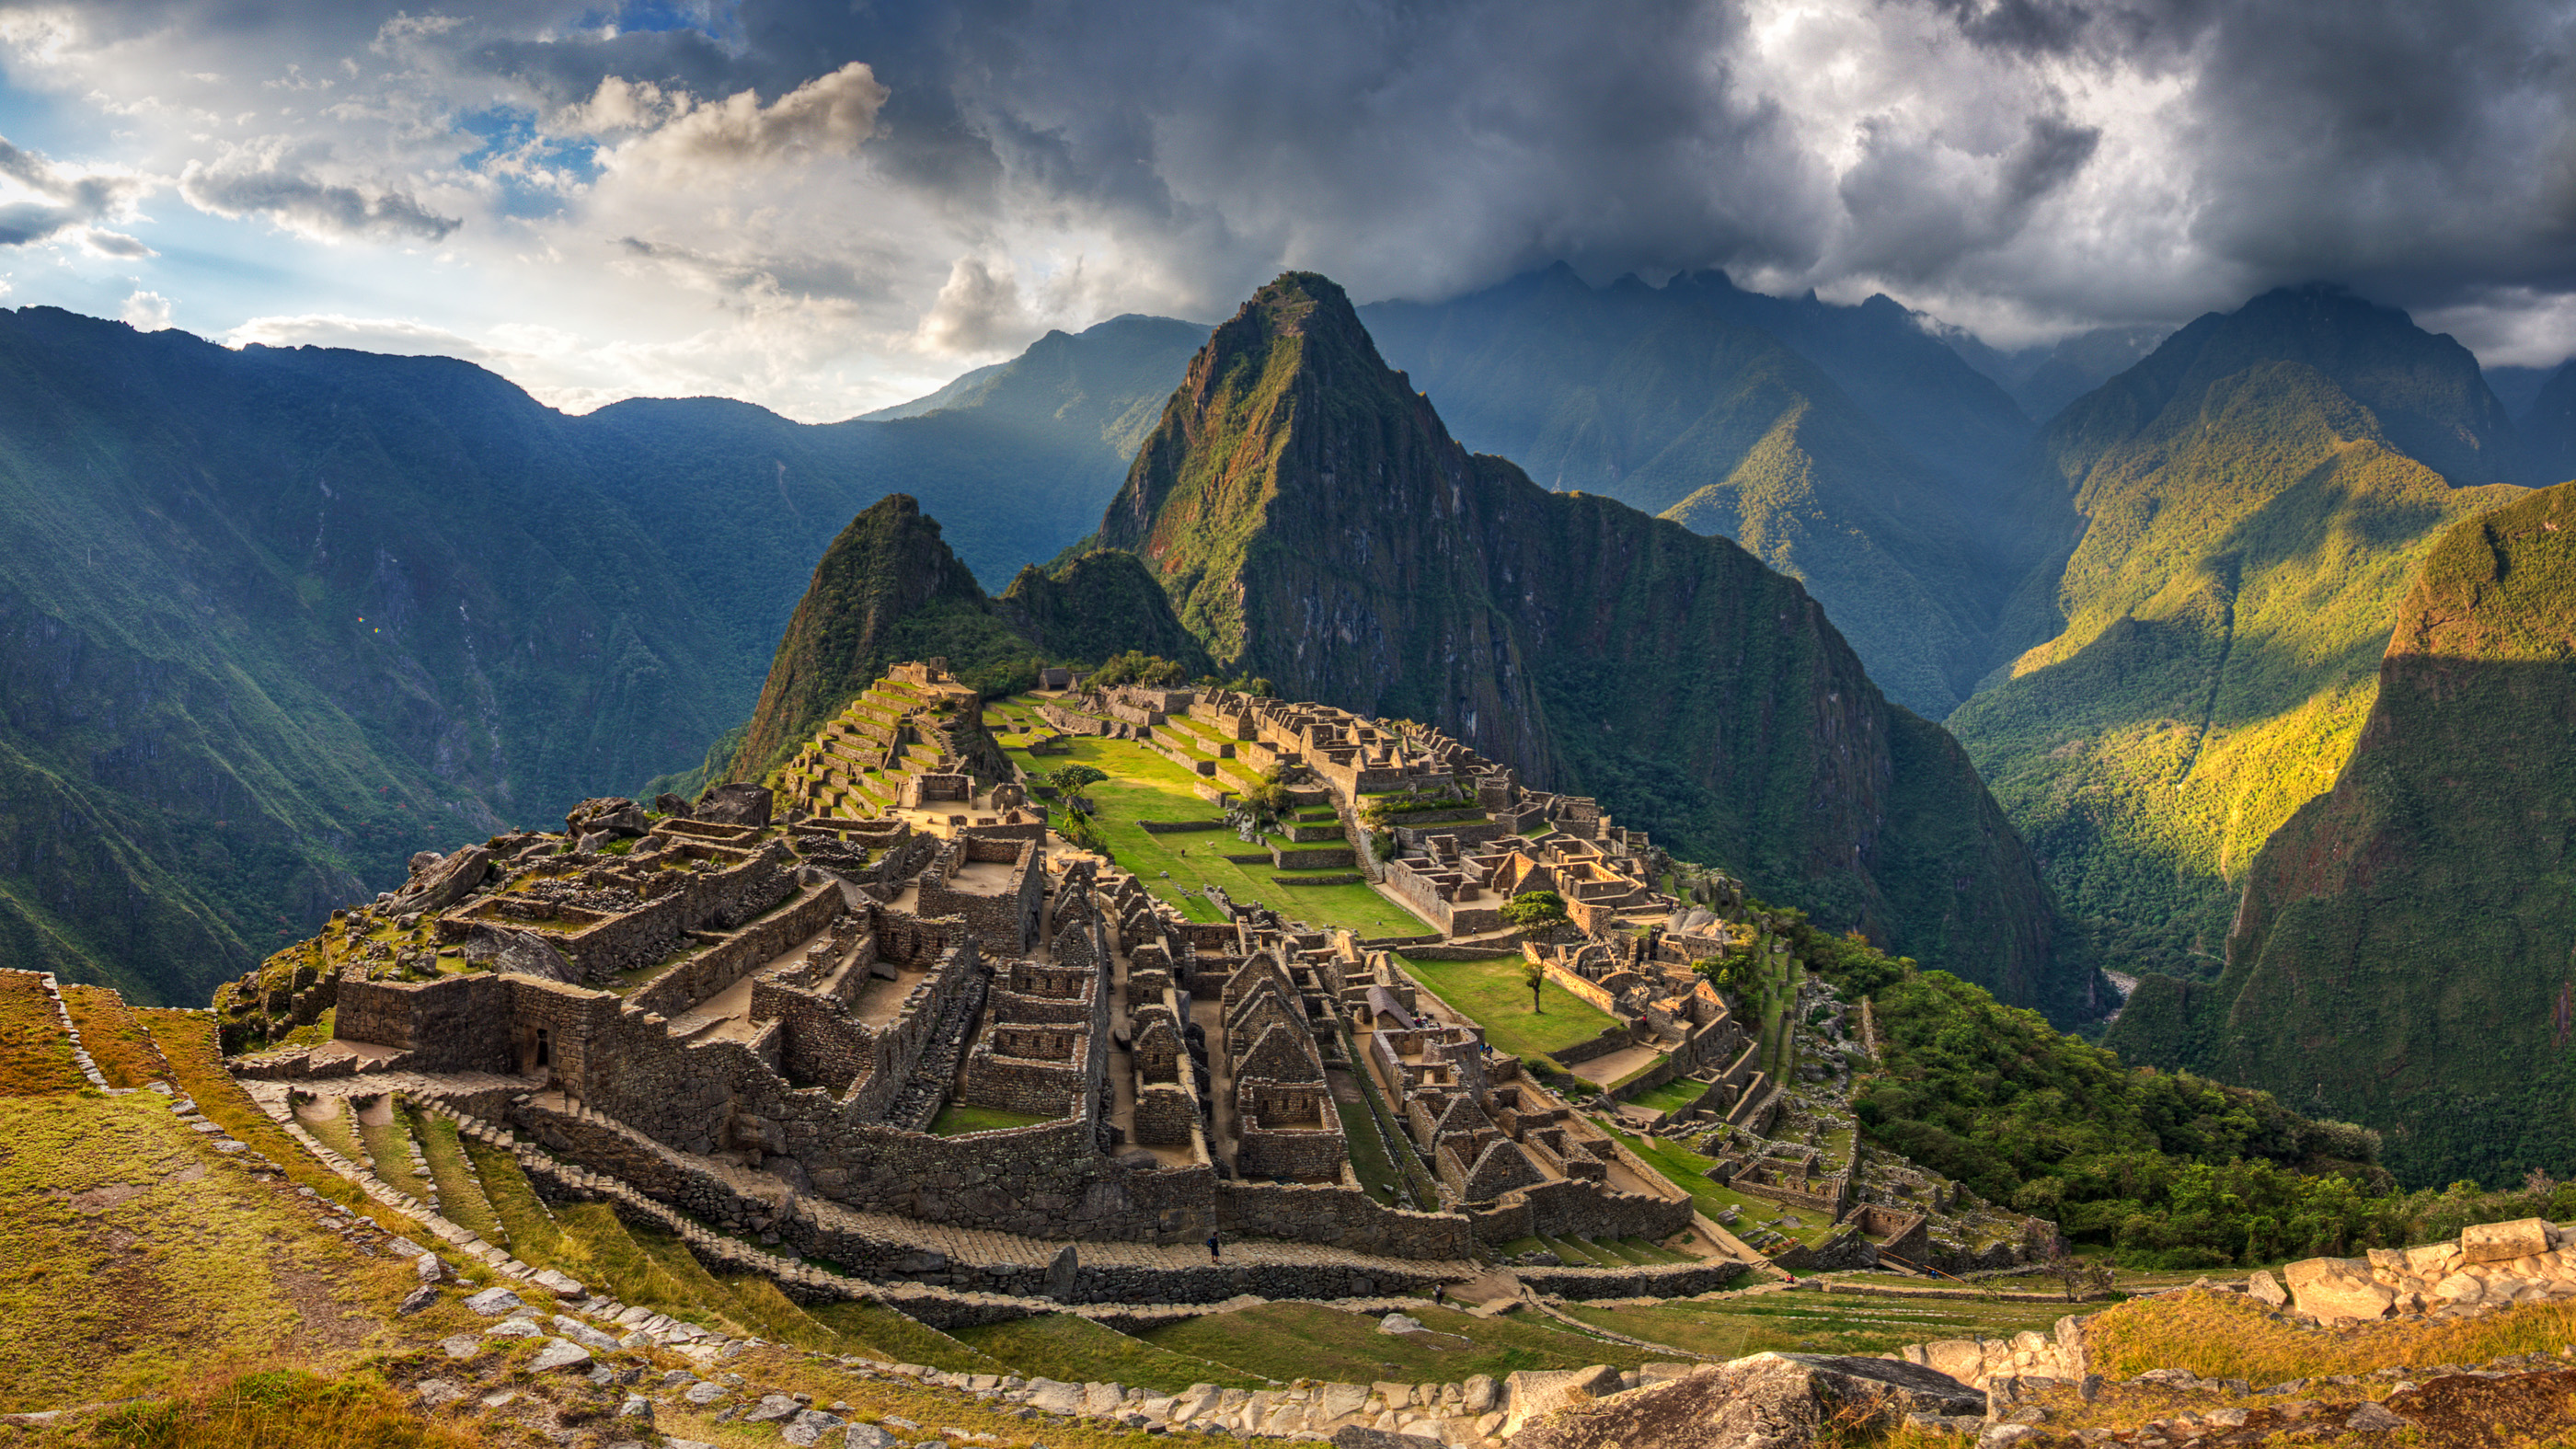 Archaeologists now think Machu Picchu was built for the emperor Pachacuti after about 1420; Pachacuti is credited with greatly expanding the Inca state by conquering neighboring regions.